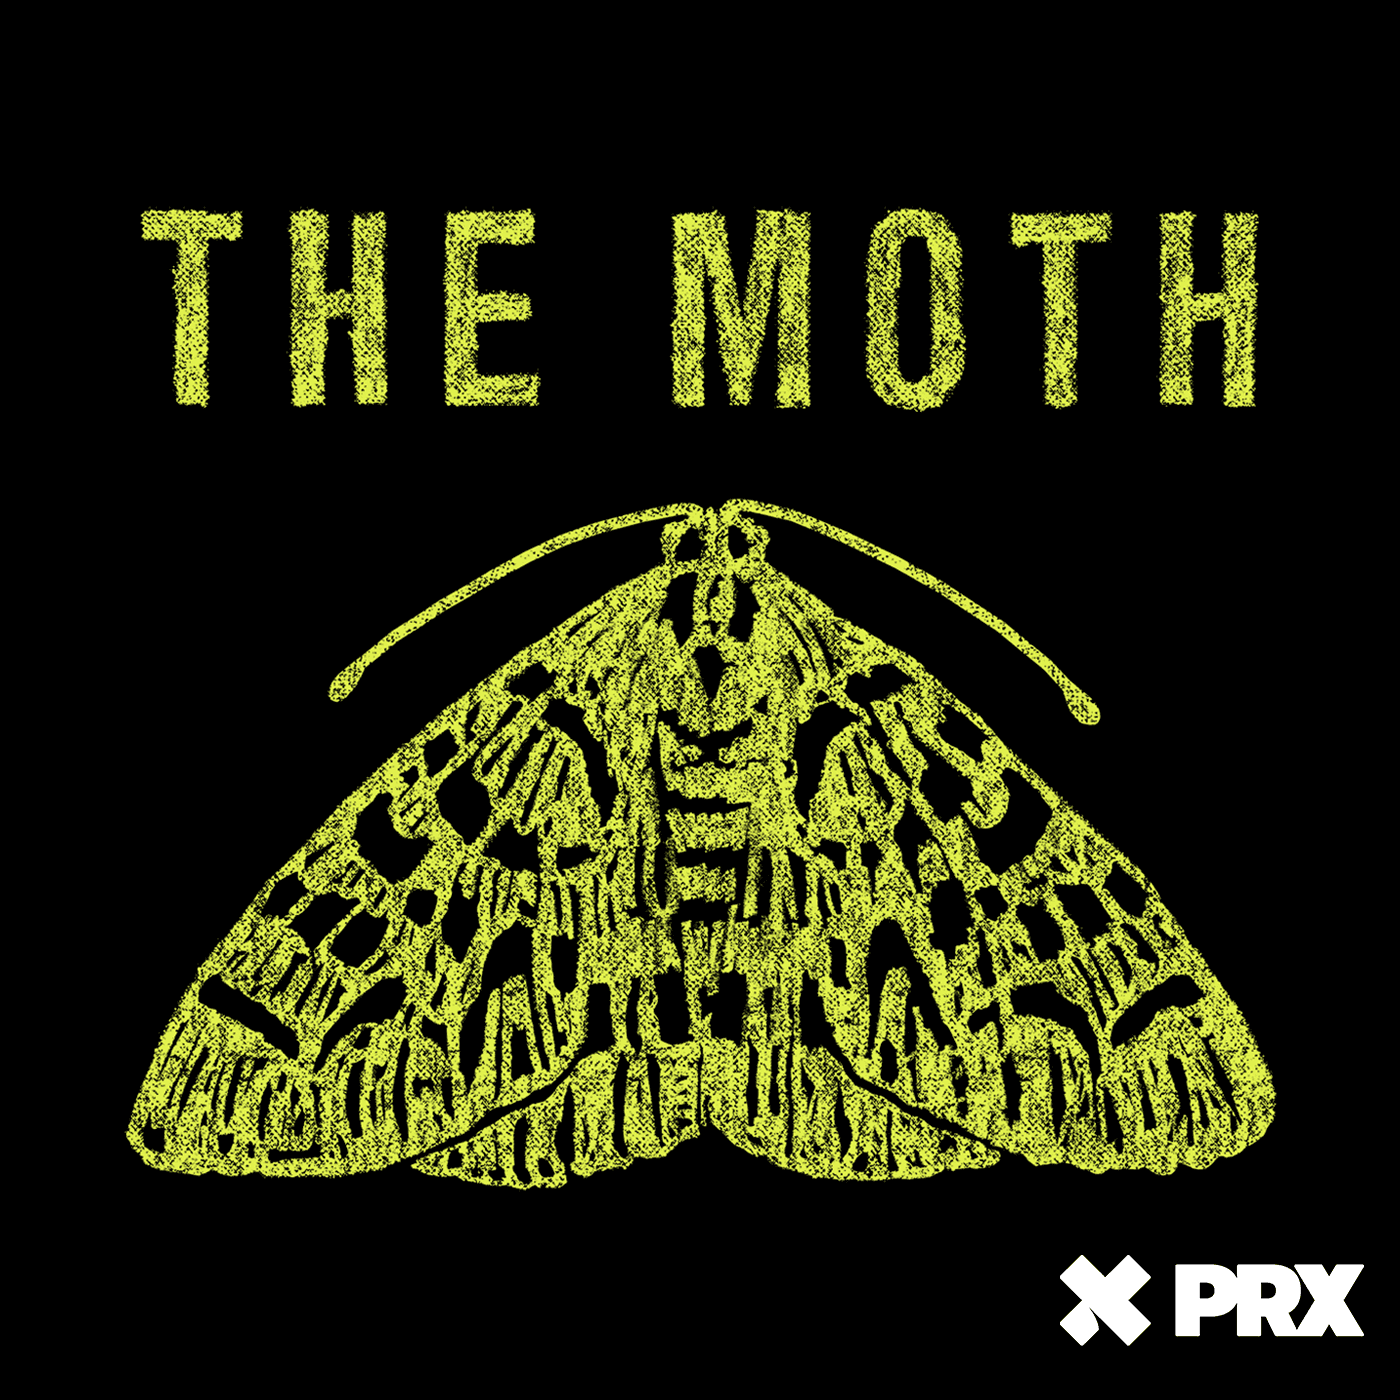 Thumbnail for "The Moth Radio Hour: A Point of Beauty".